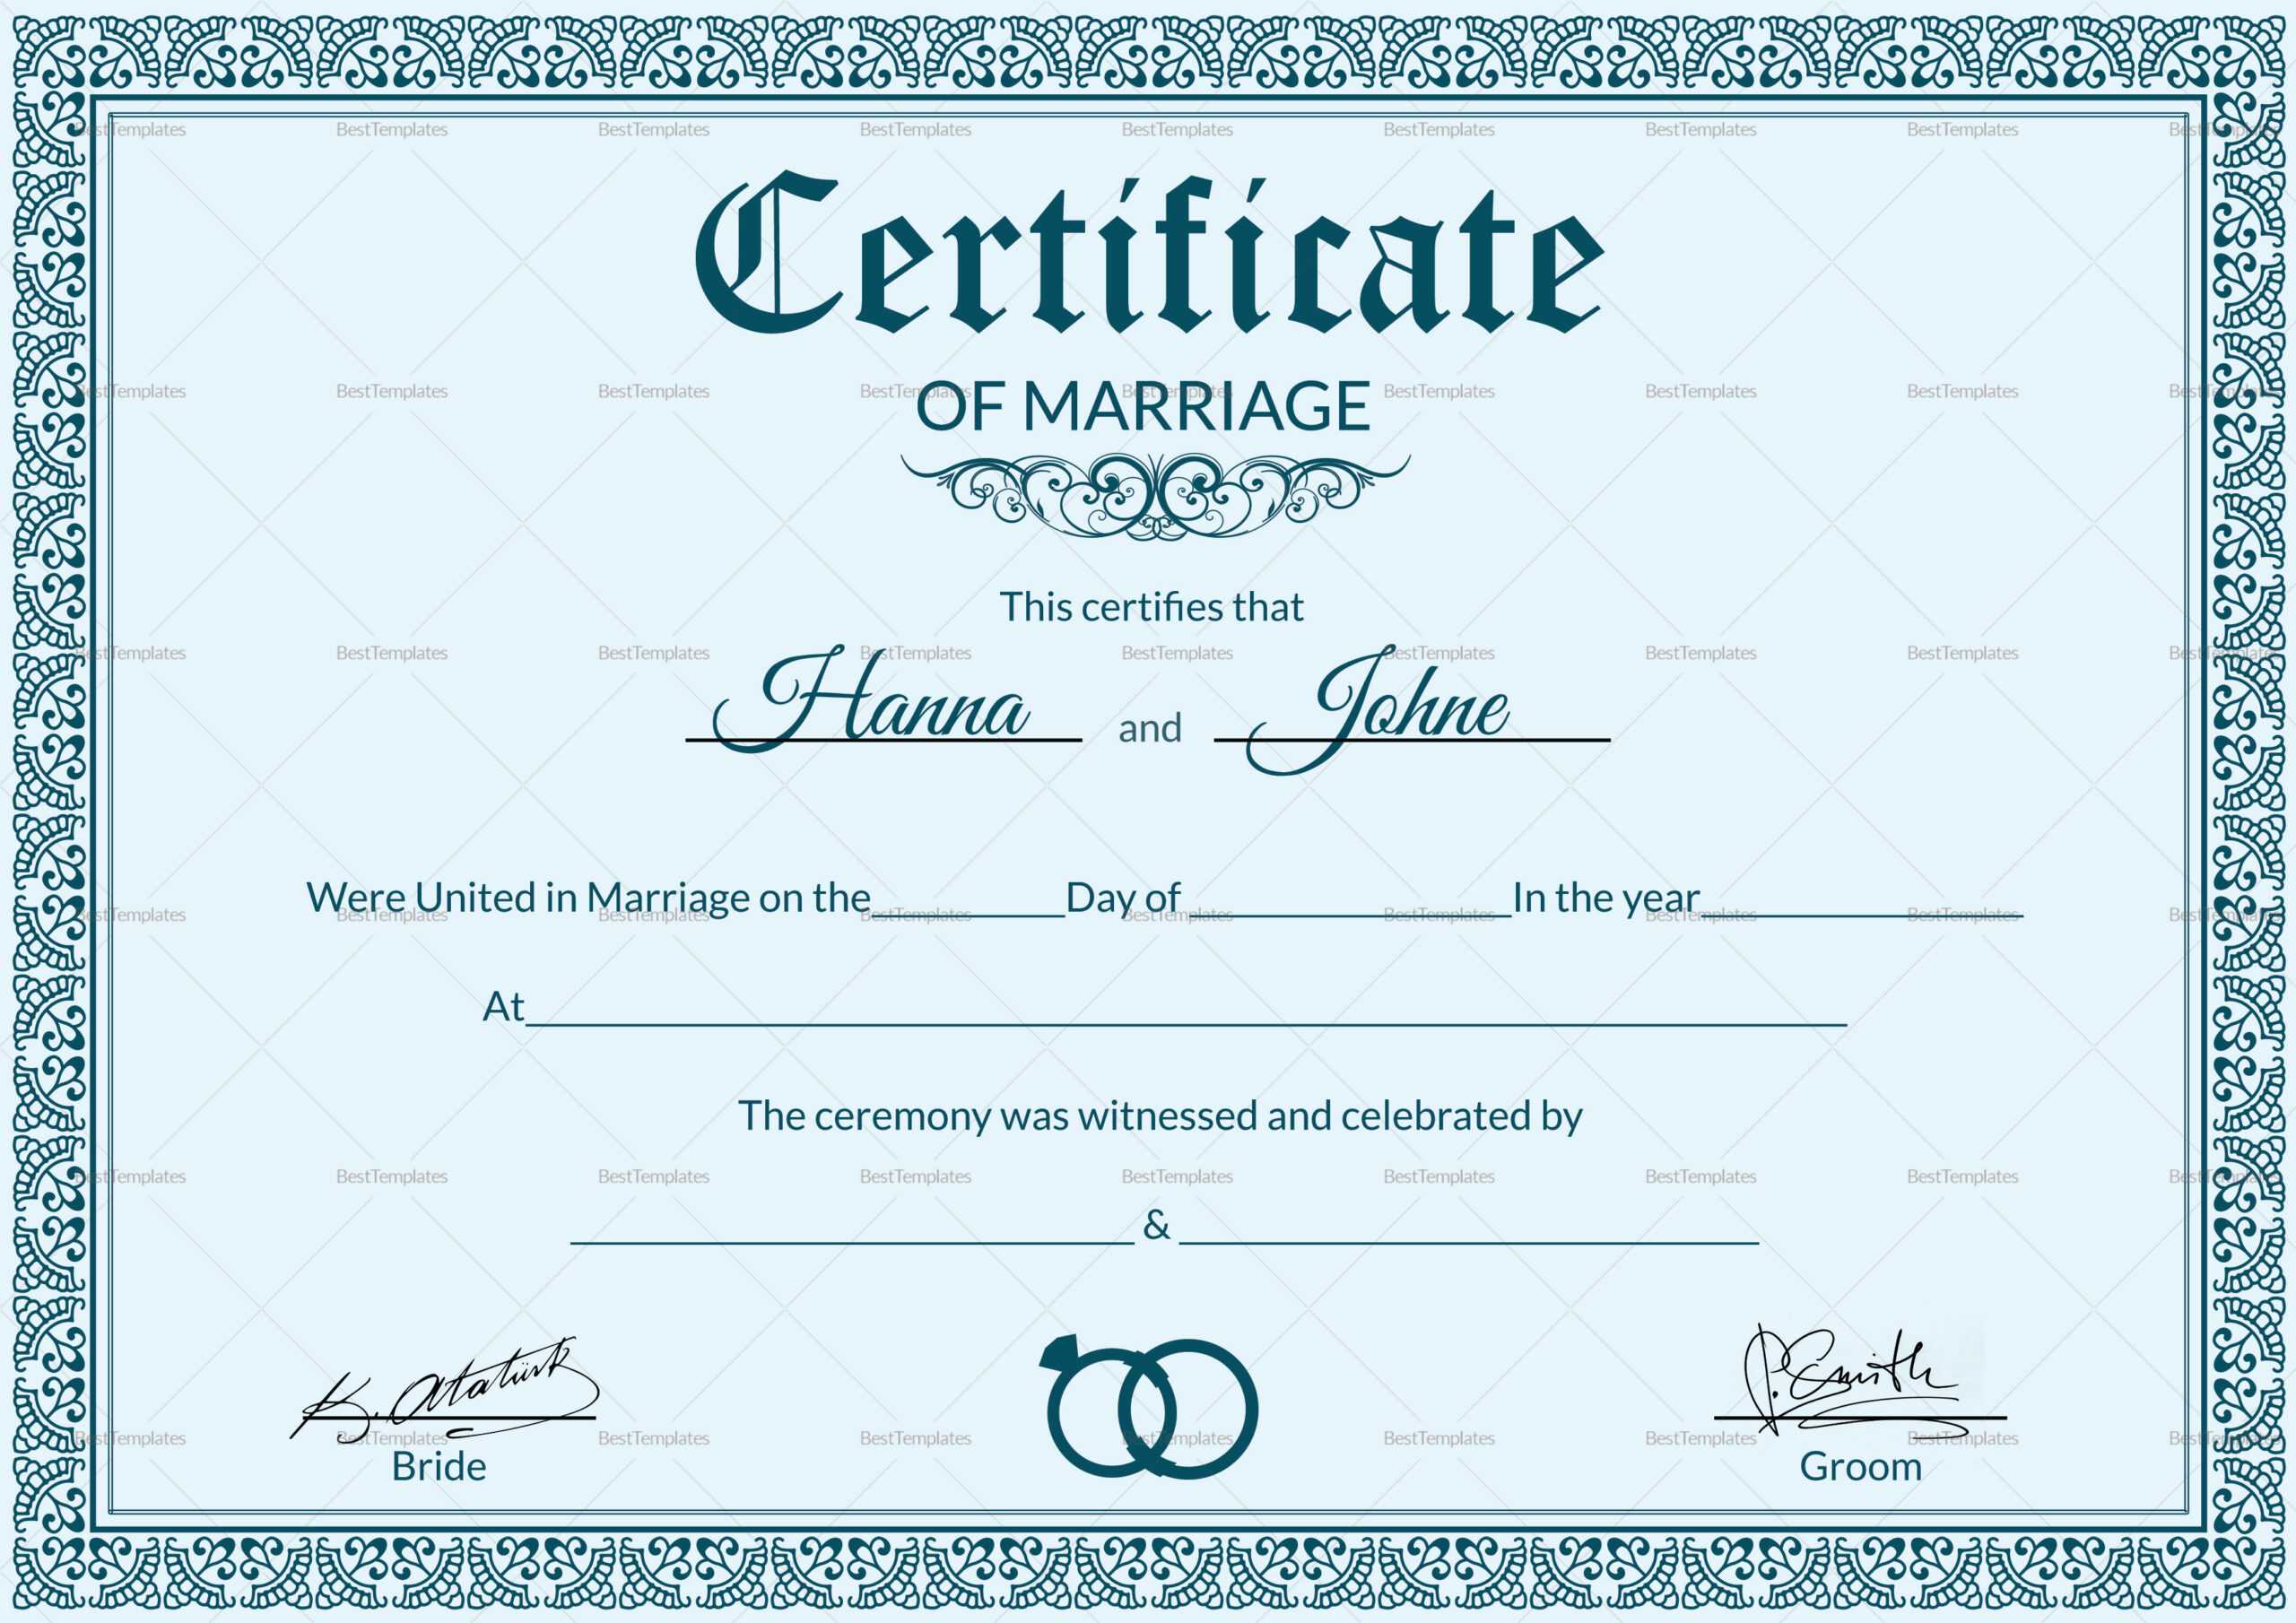 005 Marriage Certificate Template28129 Of Template Beautiful With Regard To Certificate Of Marriage Template